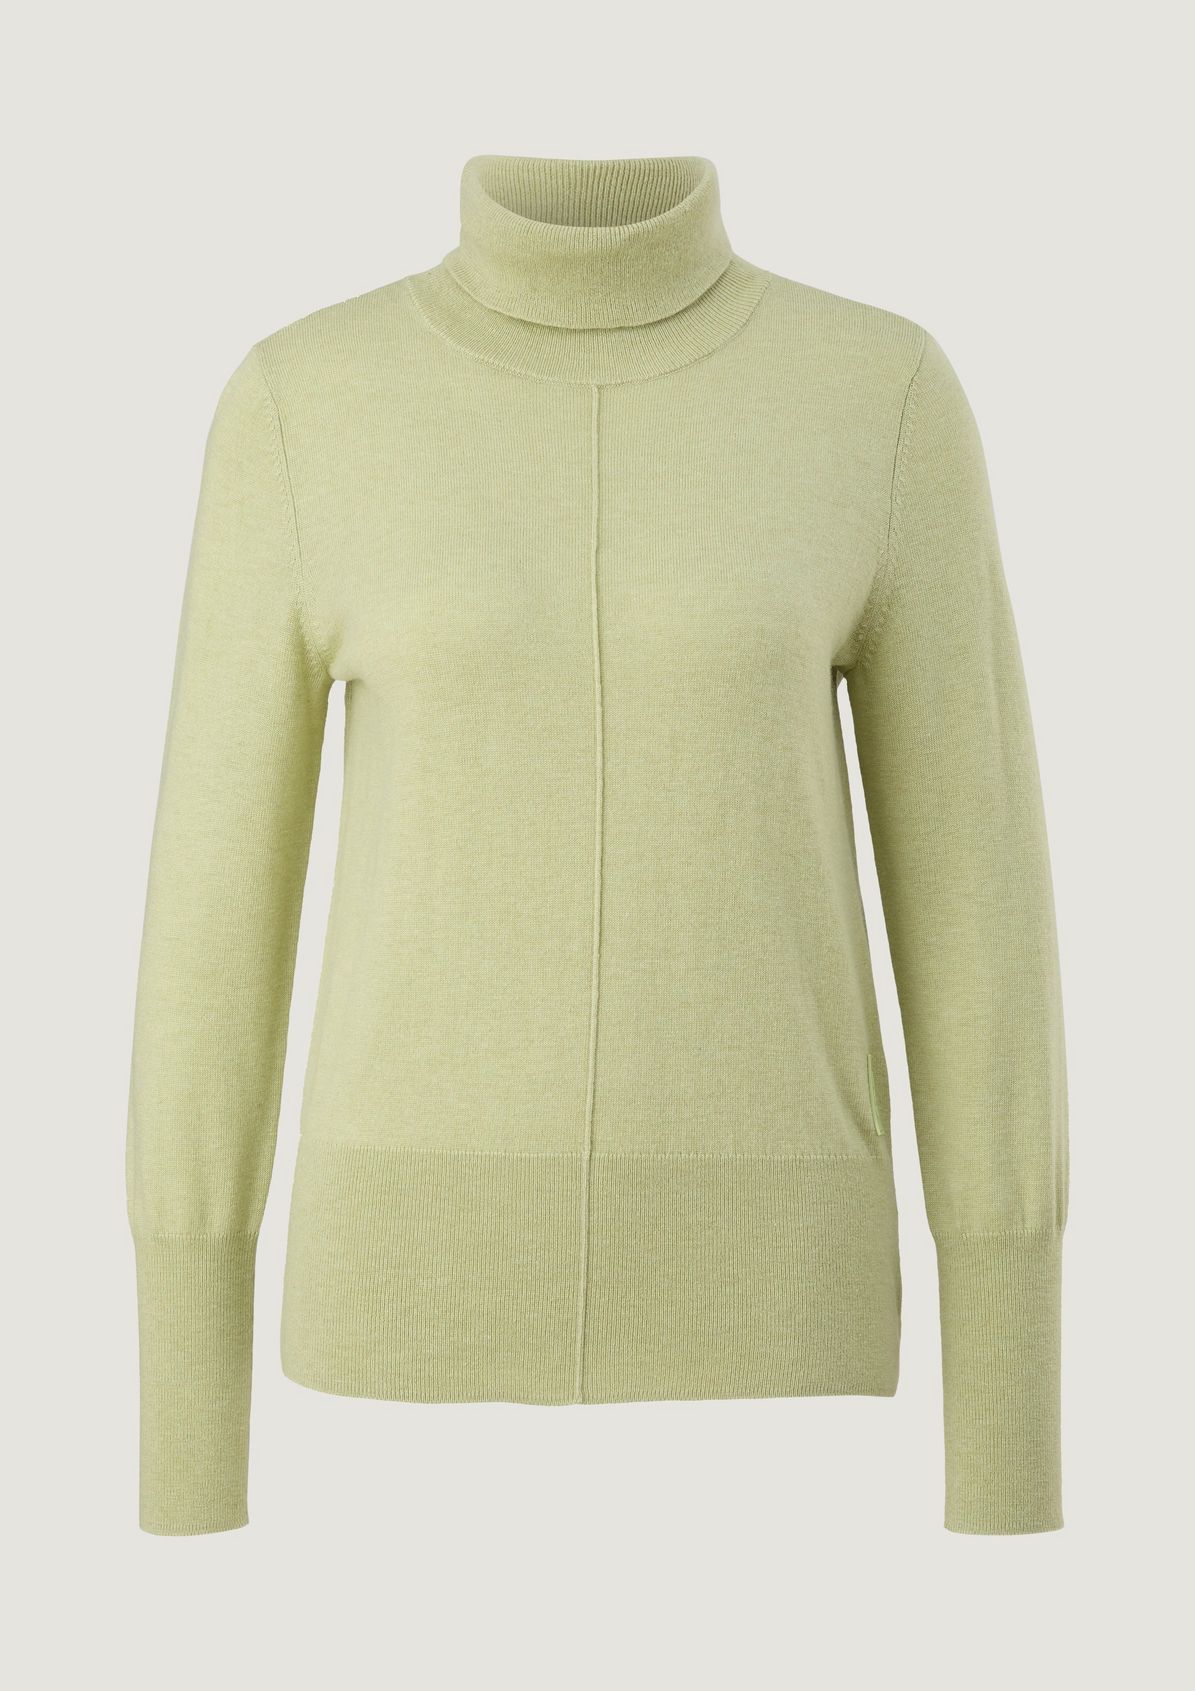 Fine knit polo neck jumper from comma